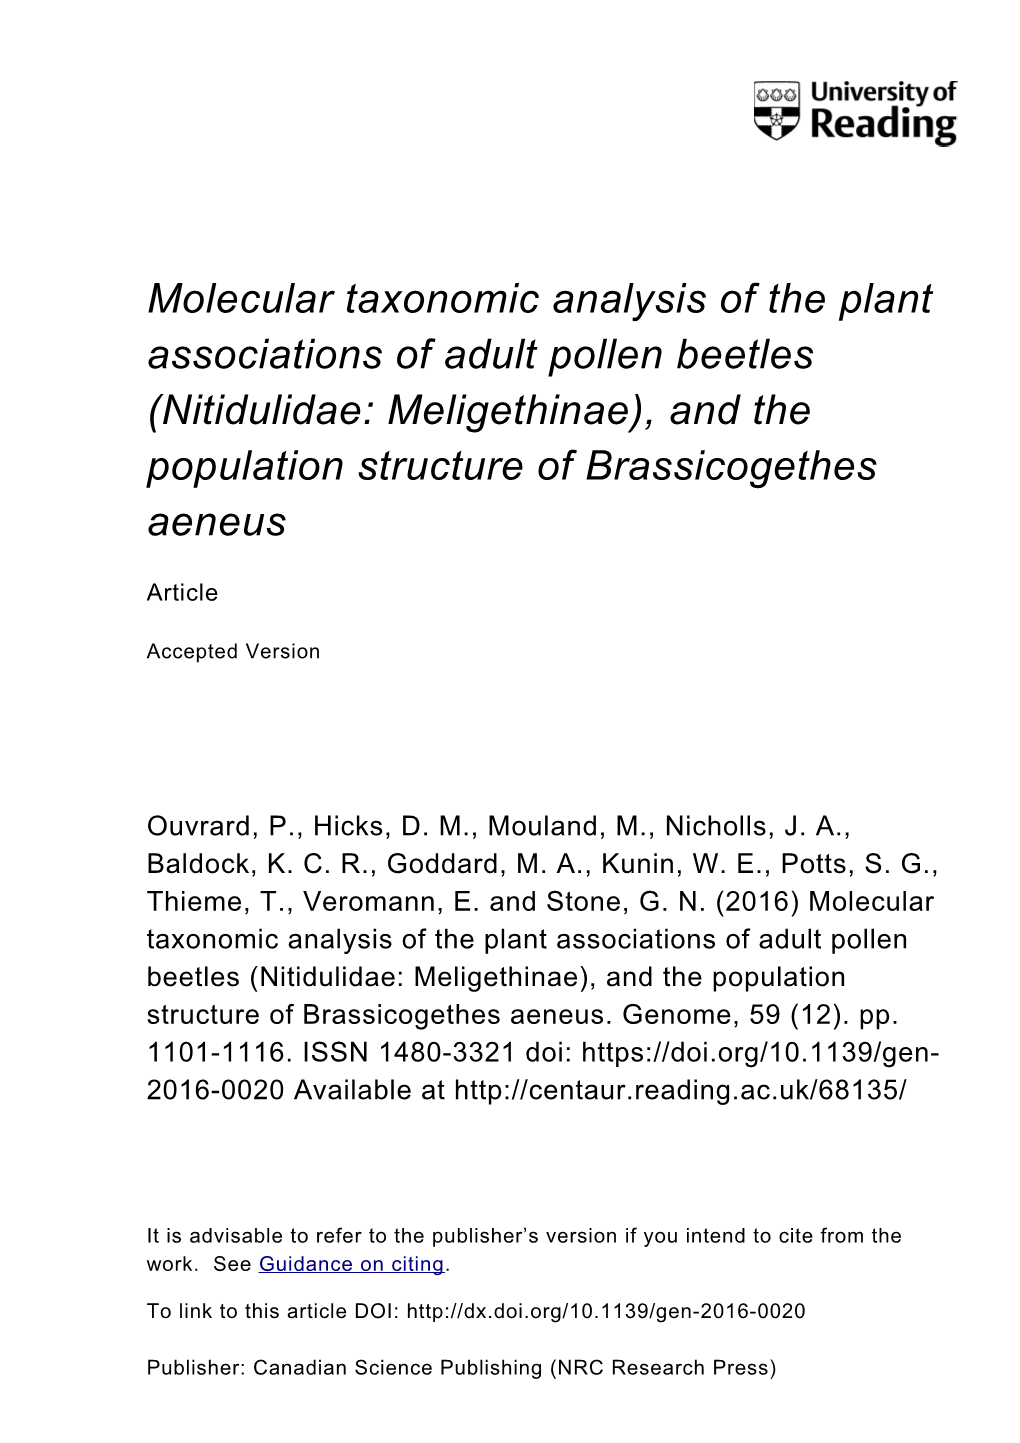 Molecular Taxonomic Analysis of the Plant Associations of Adult Pollen Beetles (Nitidulidae: Meligethinae), and the Population Structure of Brassicogethes Aeneus